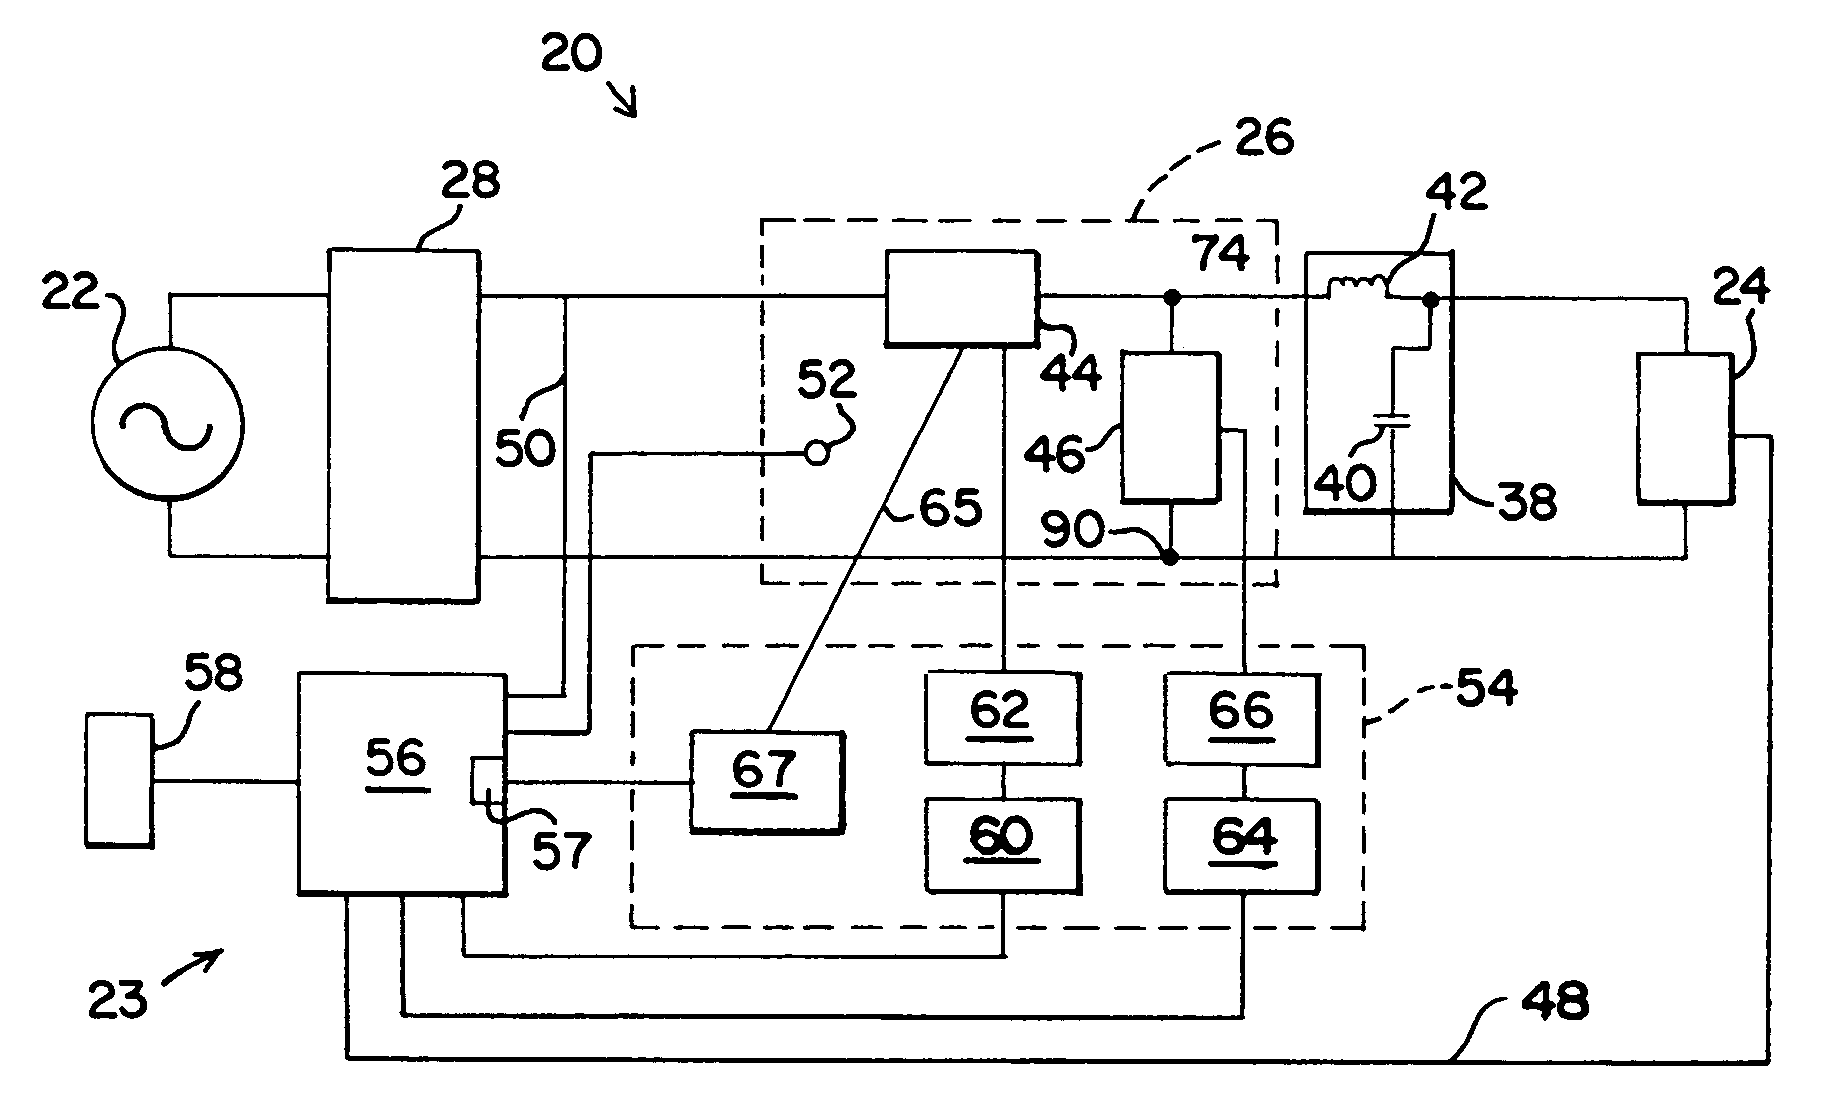 Overcurrent protection for solid state switching system